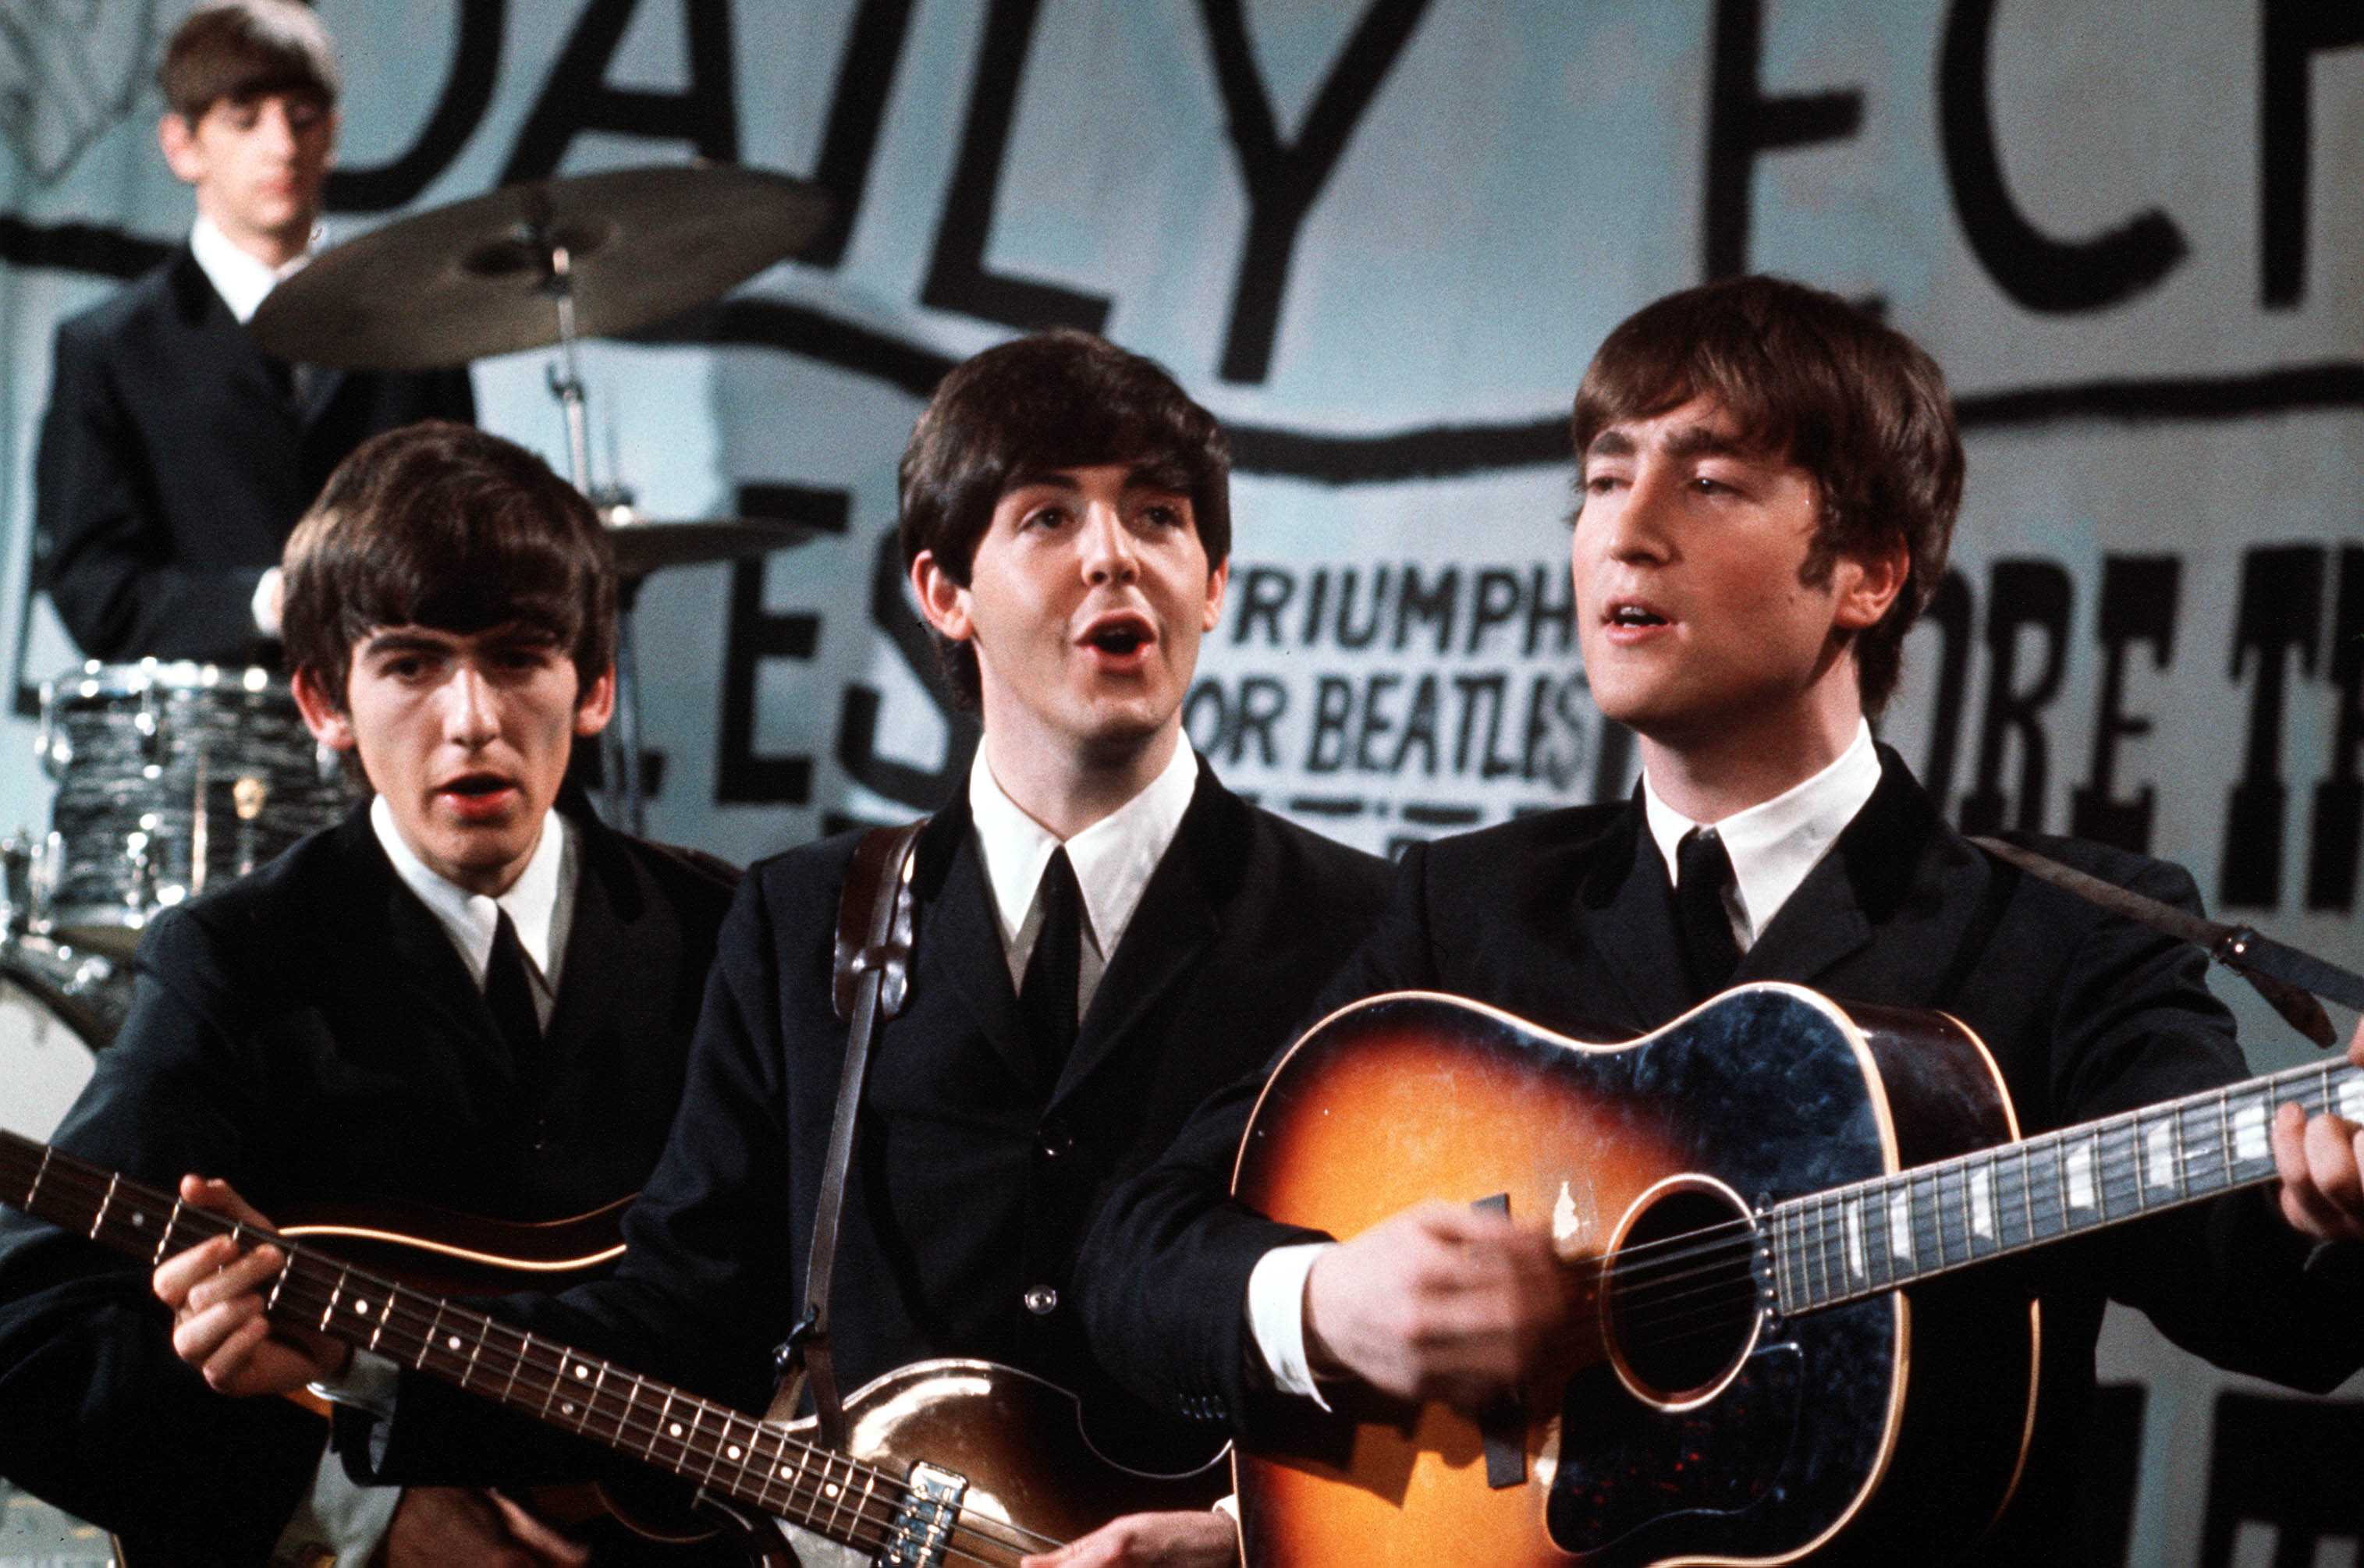 The phenomenon that was the Beatles, Left to Right: Ringo Starr on drums, George Harrison on guitar, Paul McCartney on bass and vocals, and John Lennon on acoustic guitars and vocals, 1963. (Bob Thomas—Getty Images)